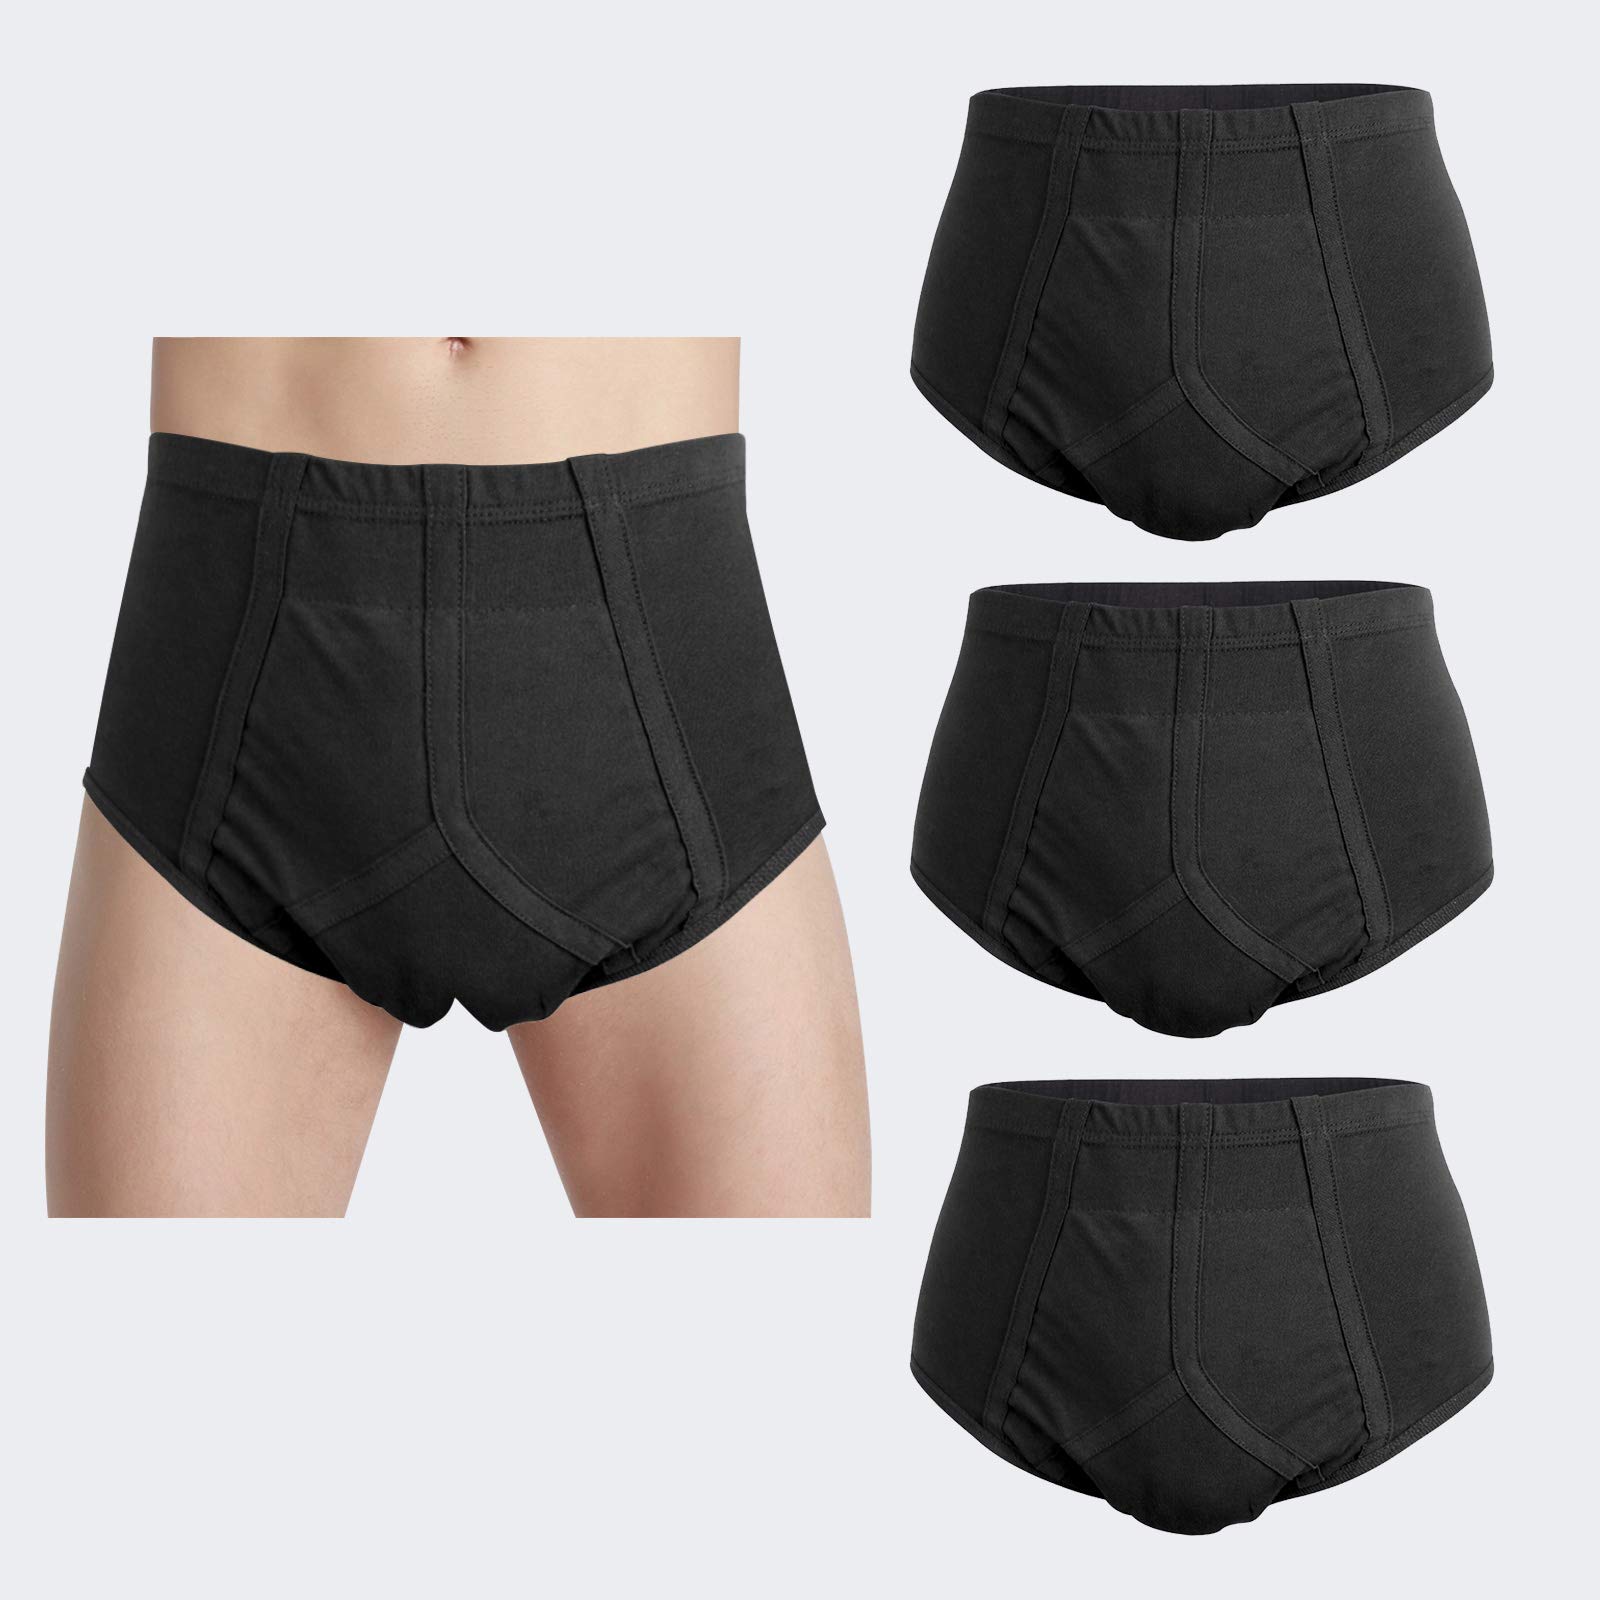  Incontinence Underwear For Men Carer 3-Pack Mens Urinary  Incontinence Briefs Washable Reusable Underwear